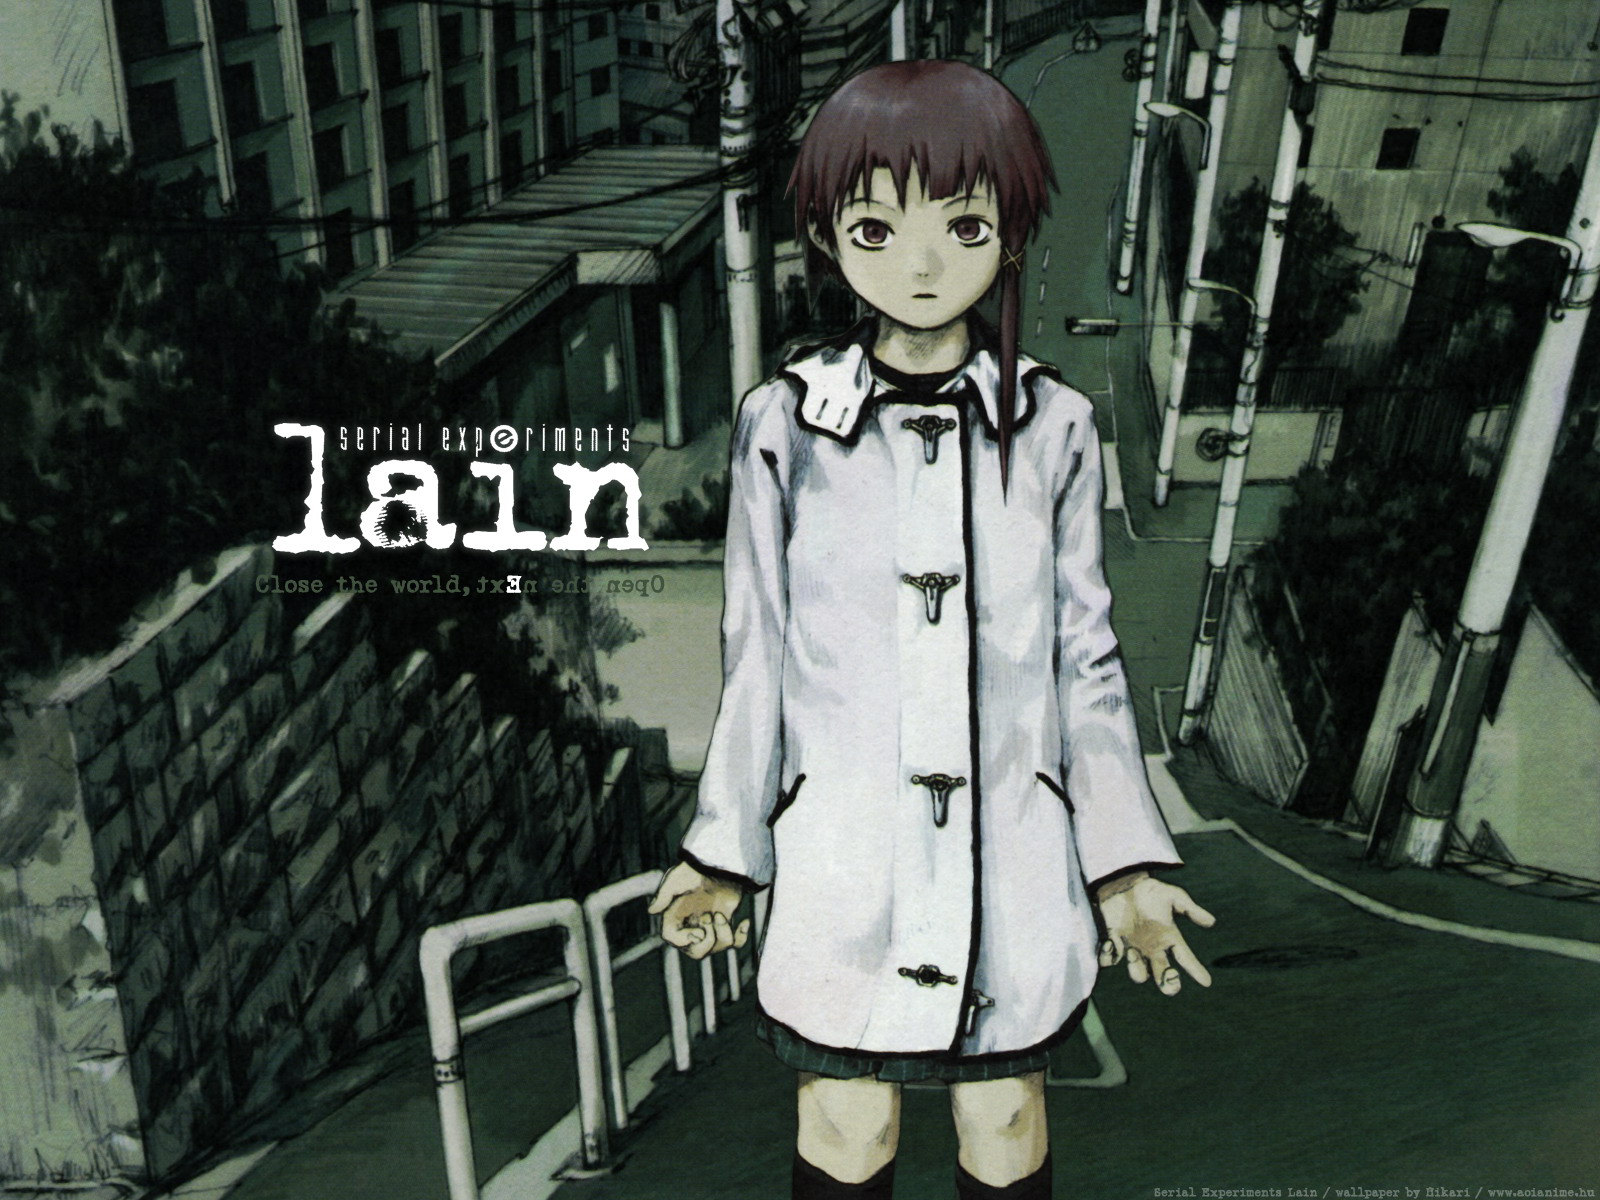 Serial Experiments Lain #9